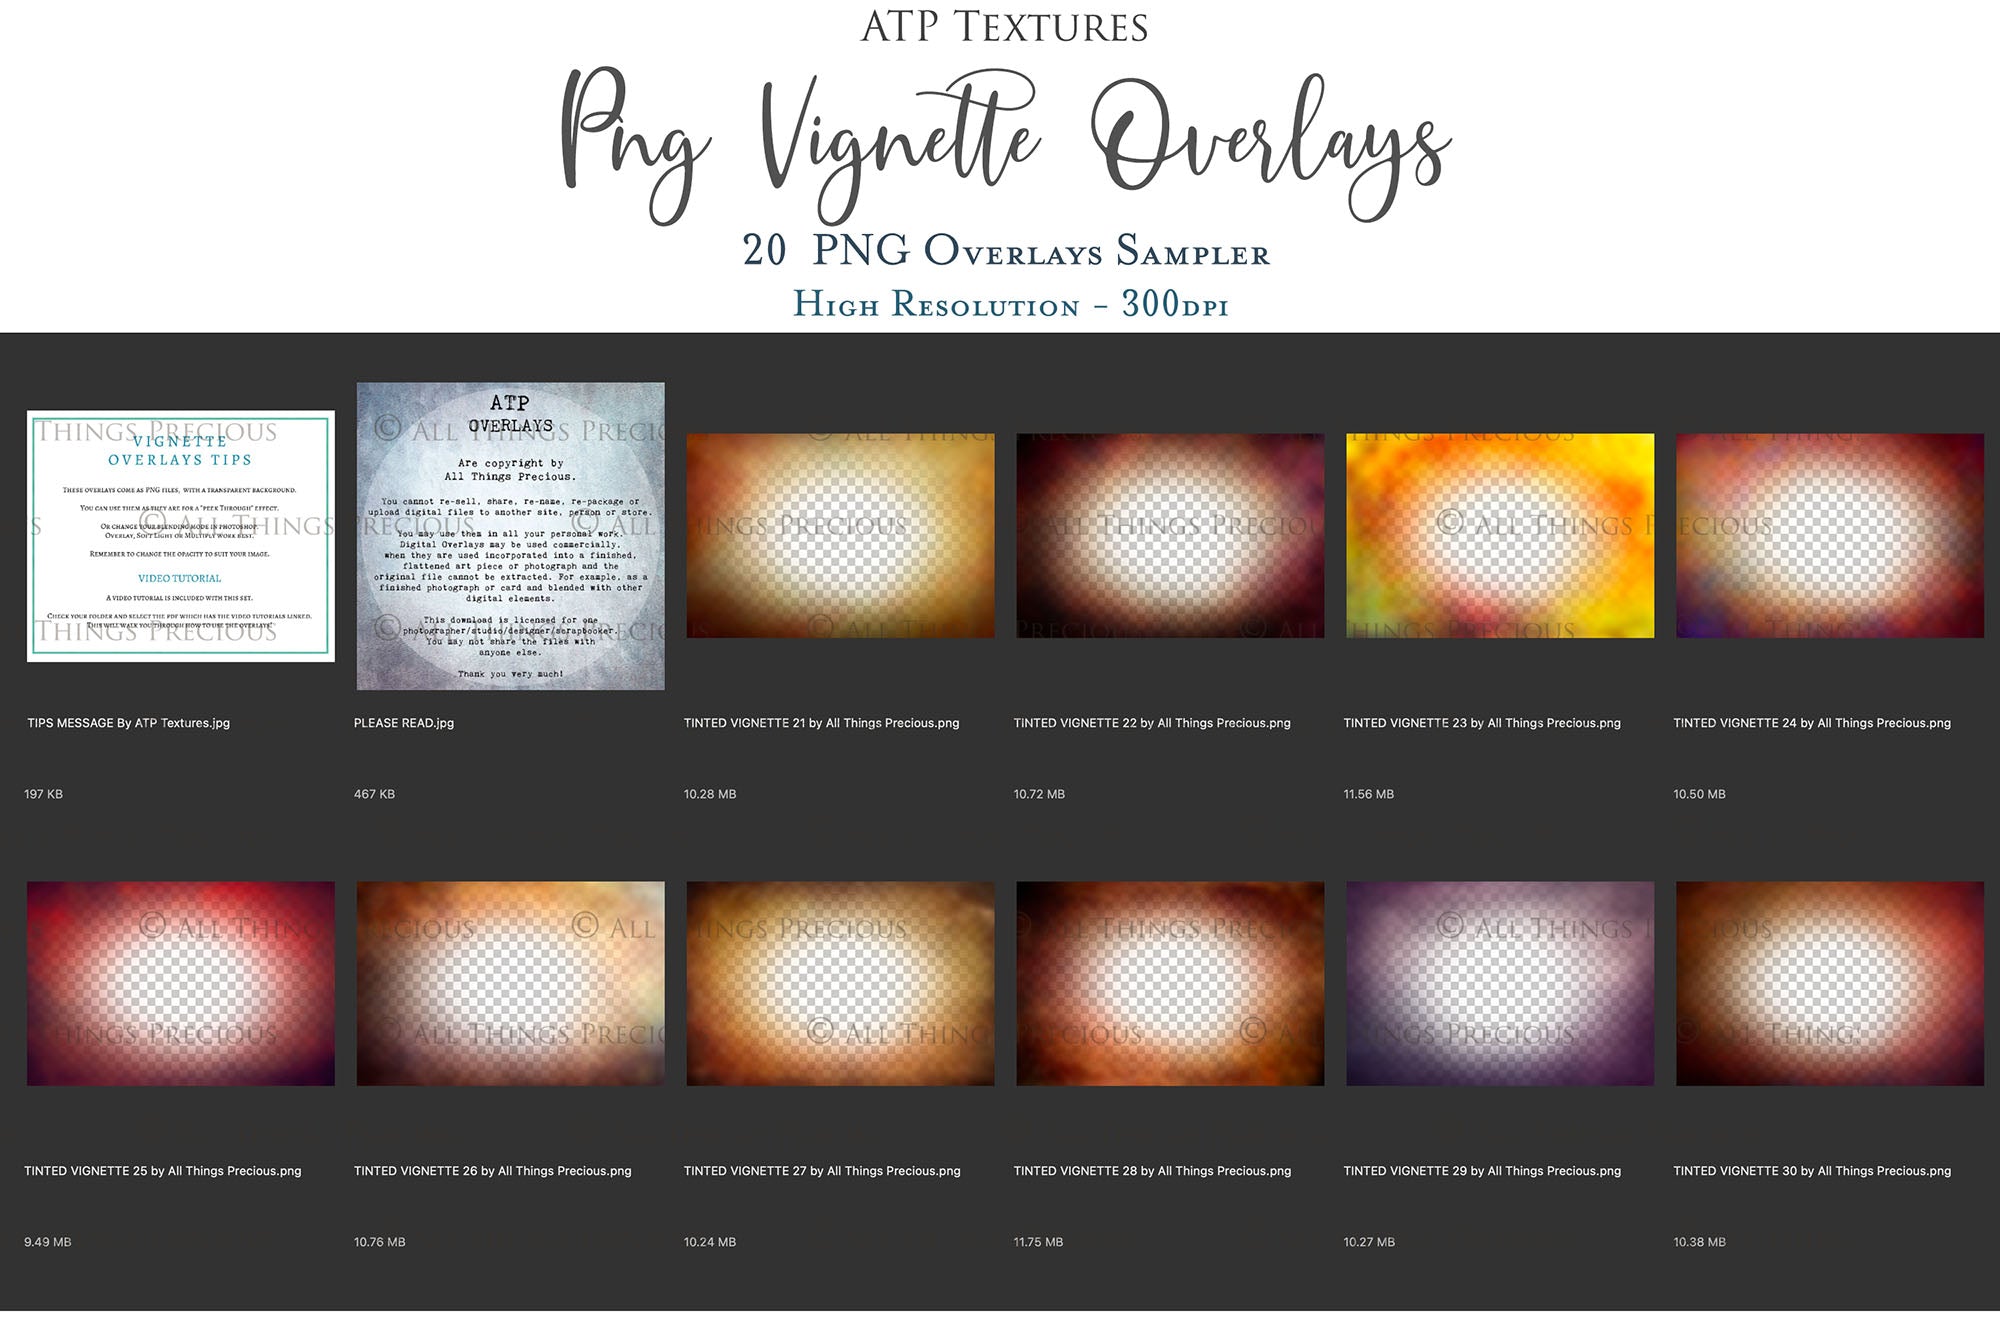 Png Overlays for photographers, Photoshop. Peek through Overlay, Vignette Overlays, Textures, High resolution, Digital Background by ATP textures.